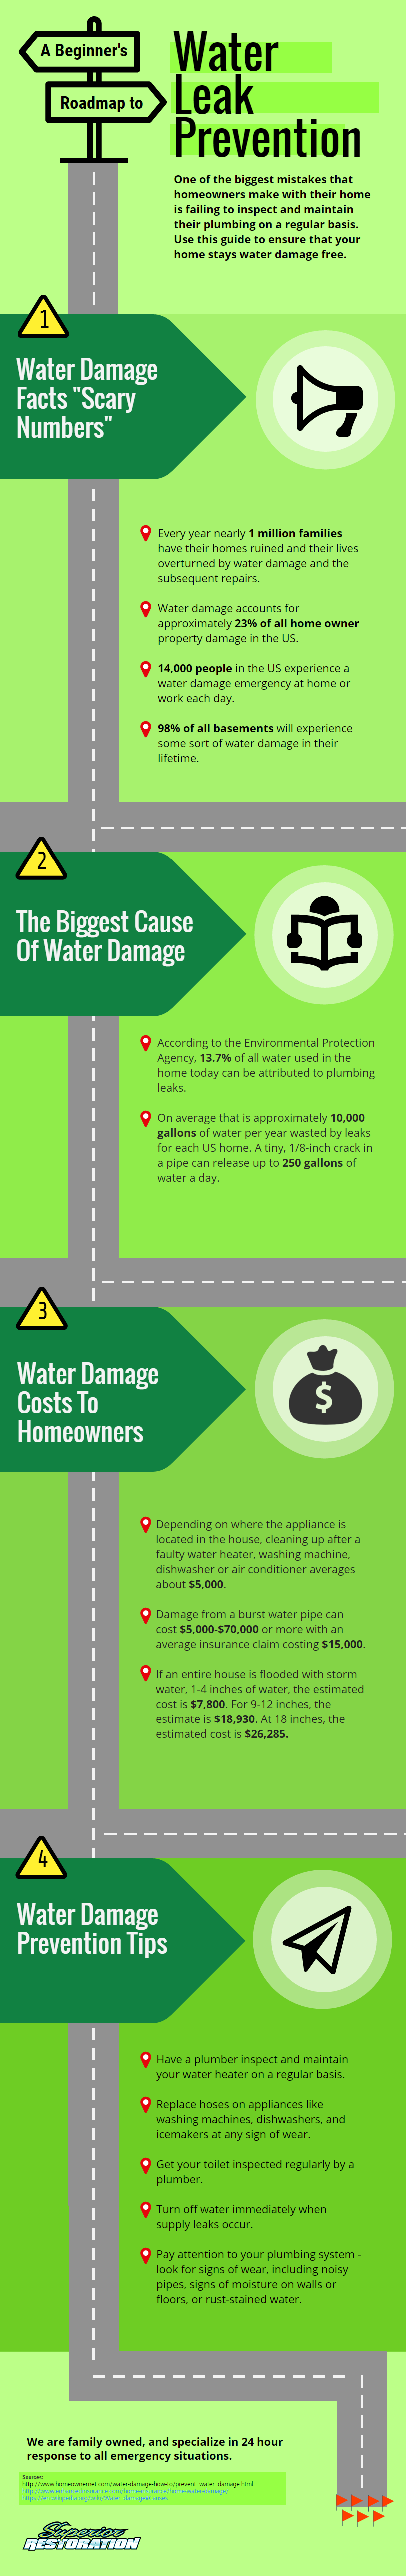 water damage prevention tips